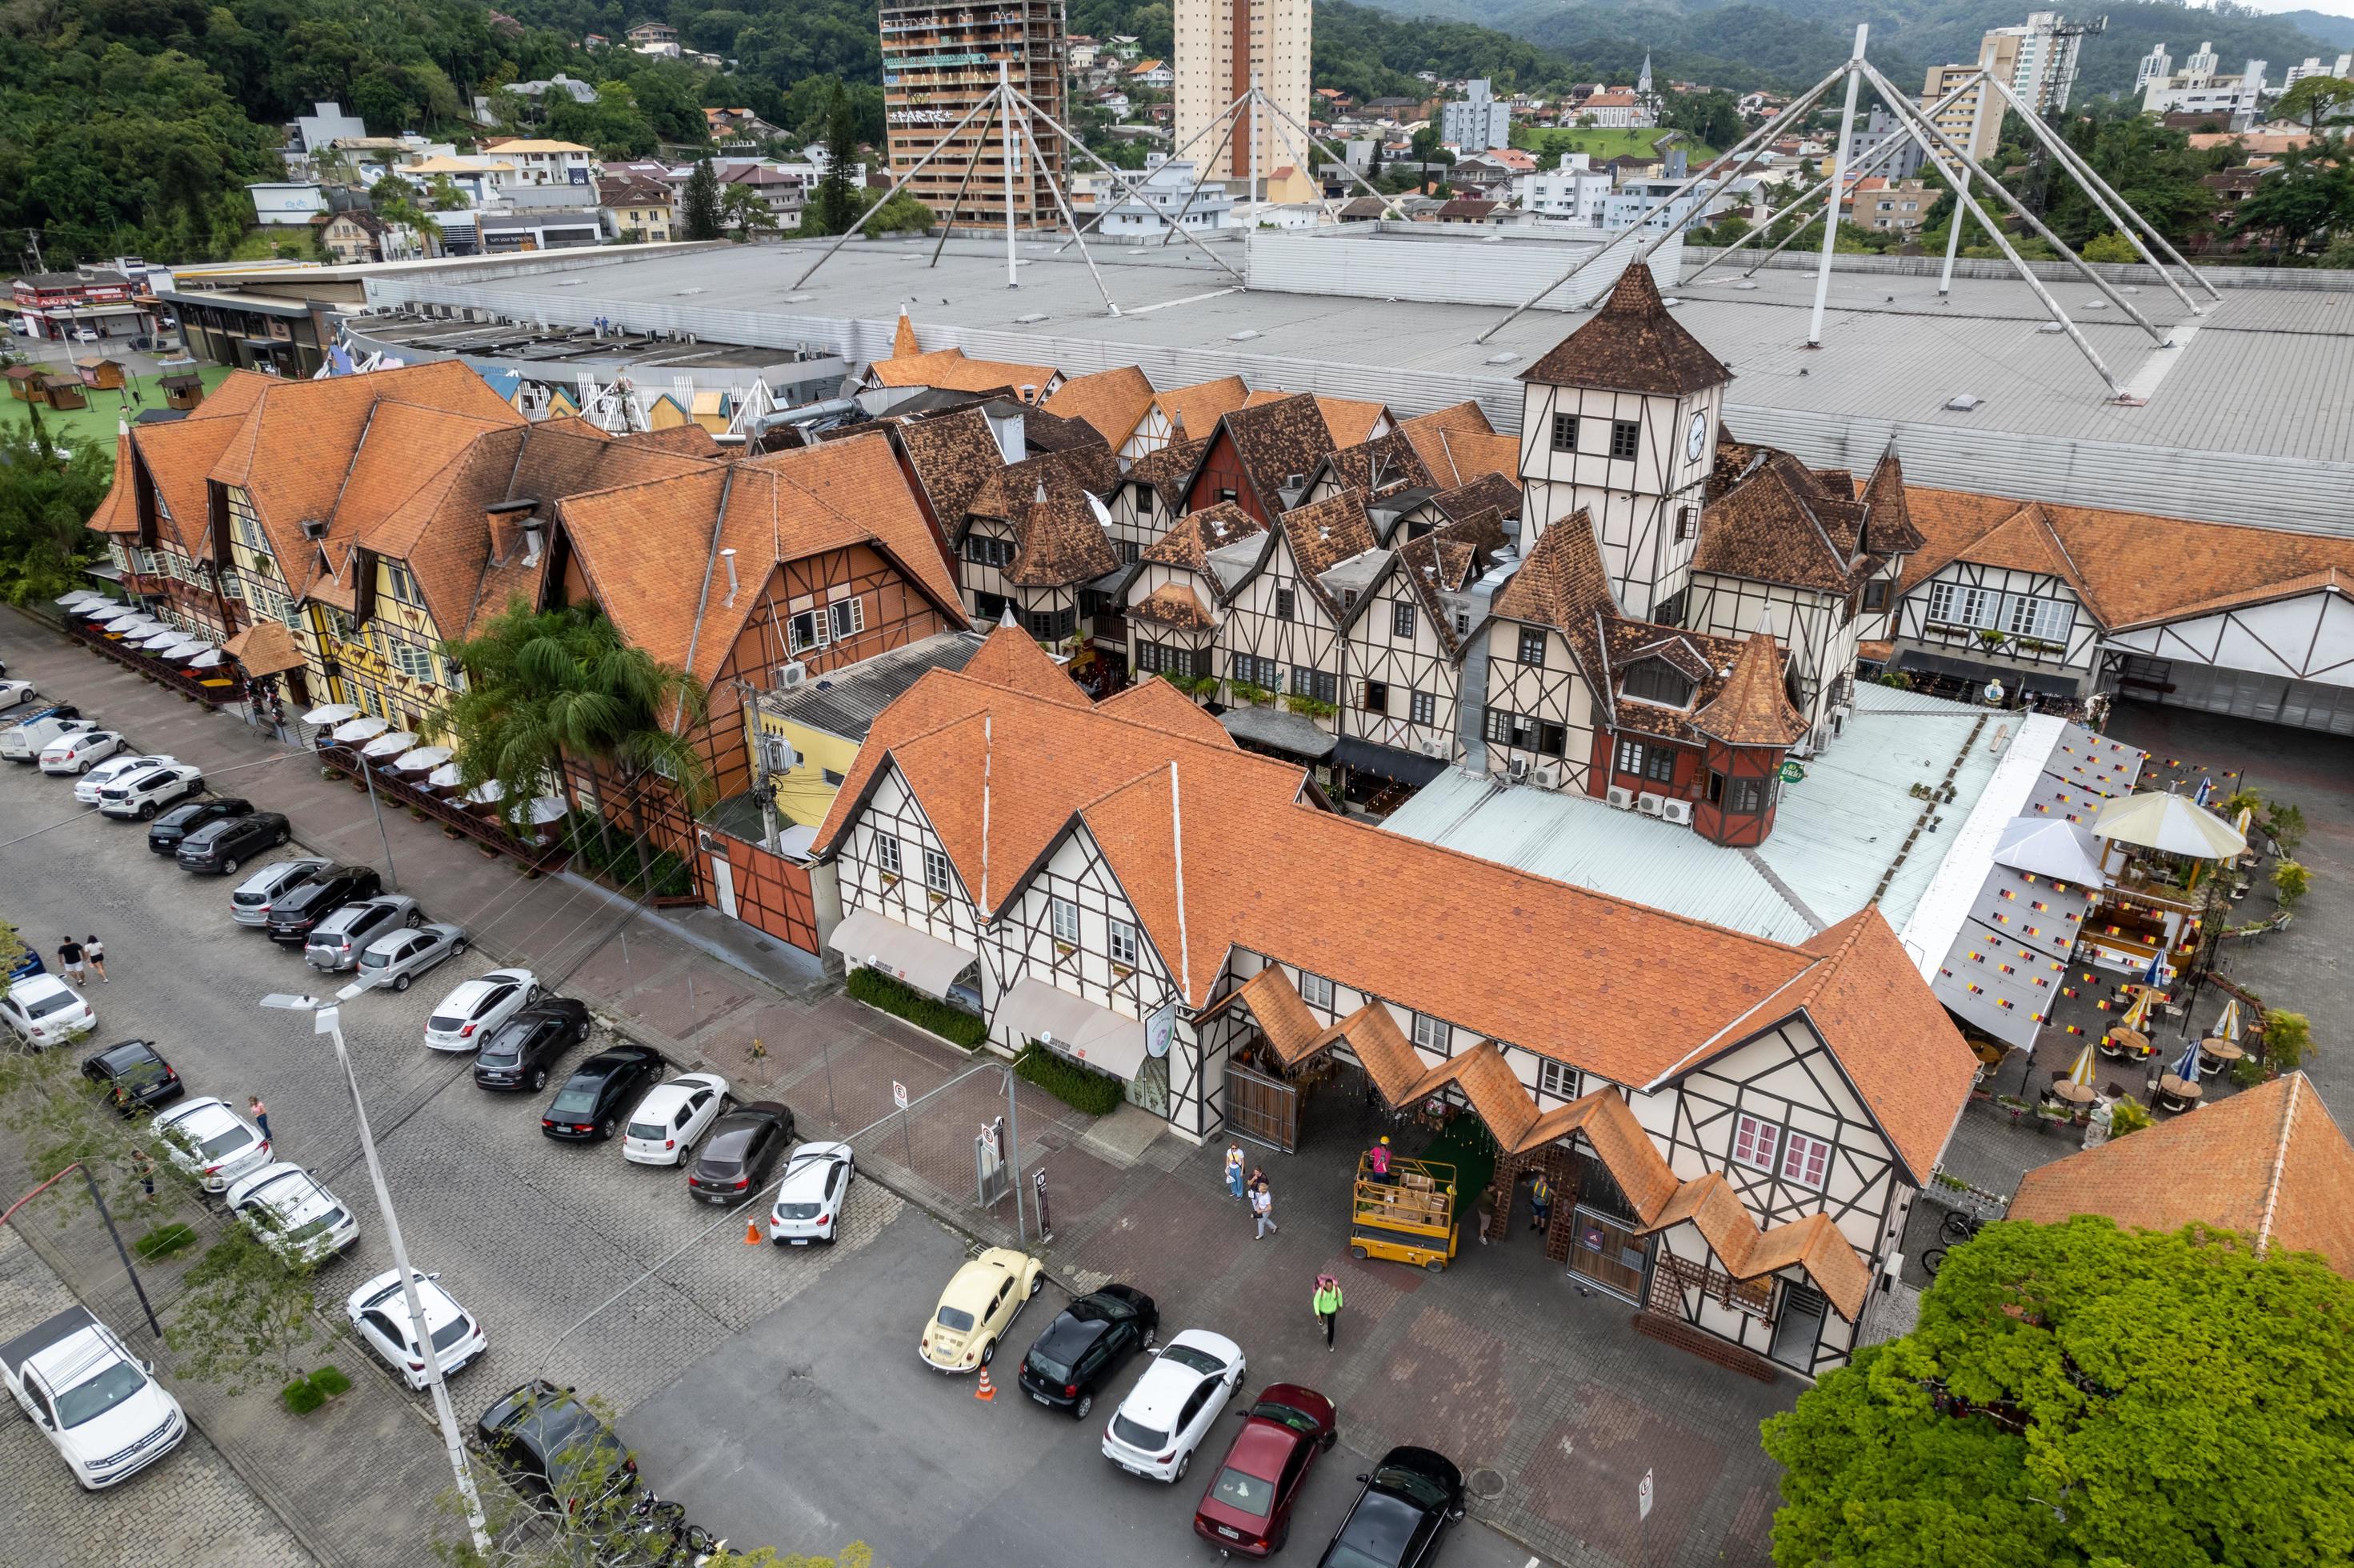 Urbiotica and GuidePark launch a pioneering project to improve parking in Blumenau 